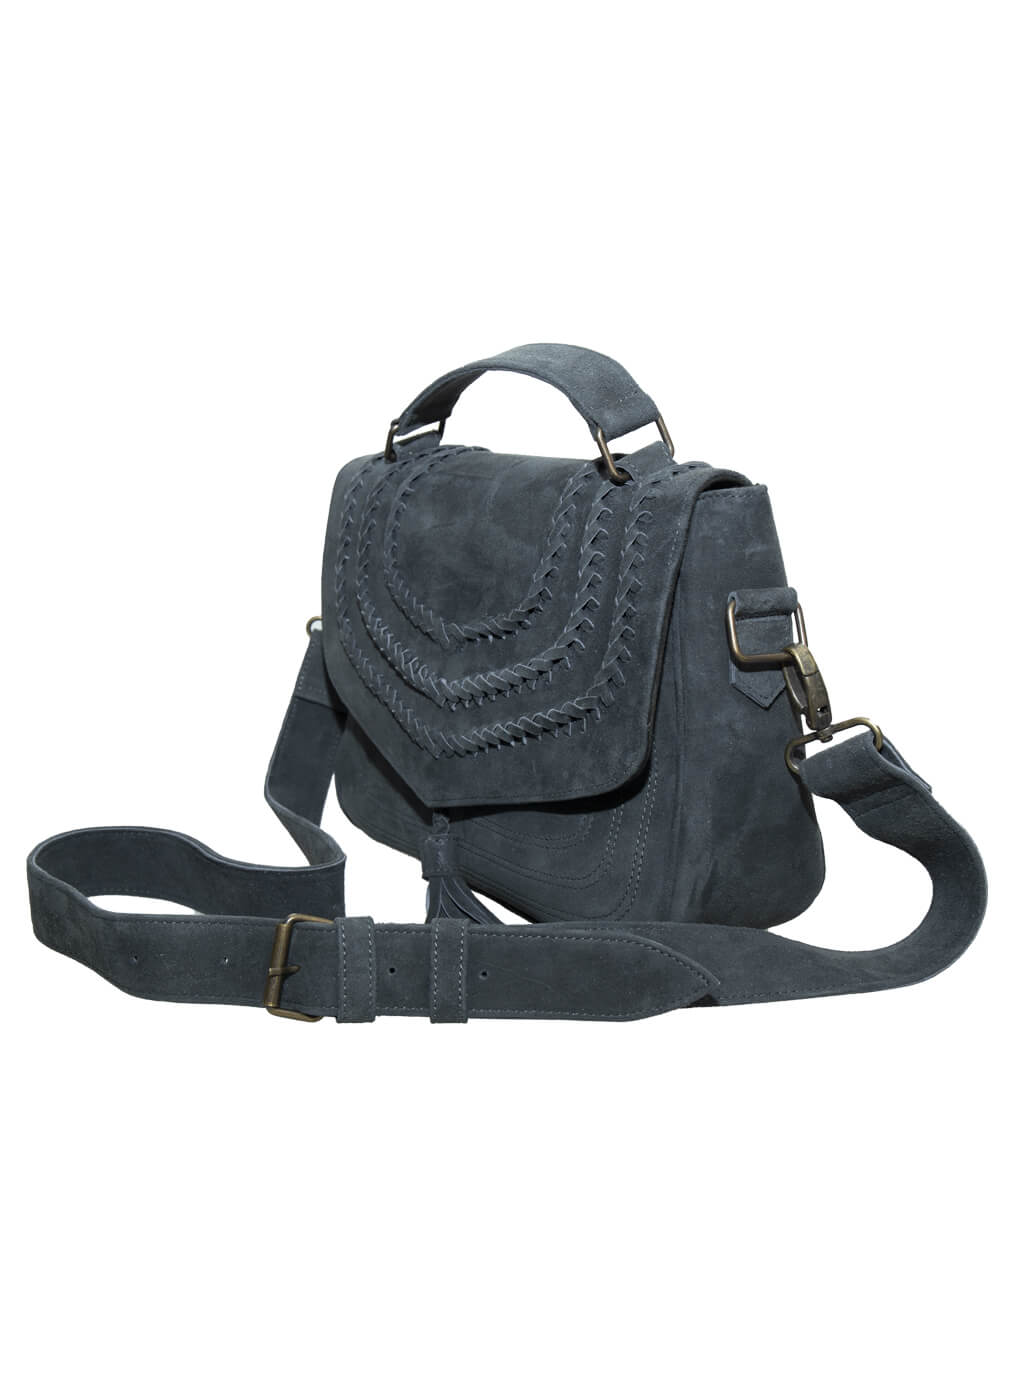 Goat Leather Bag “Just About you”, dusty indigo